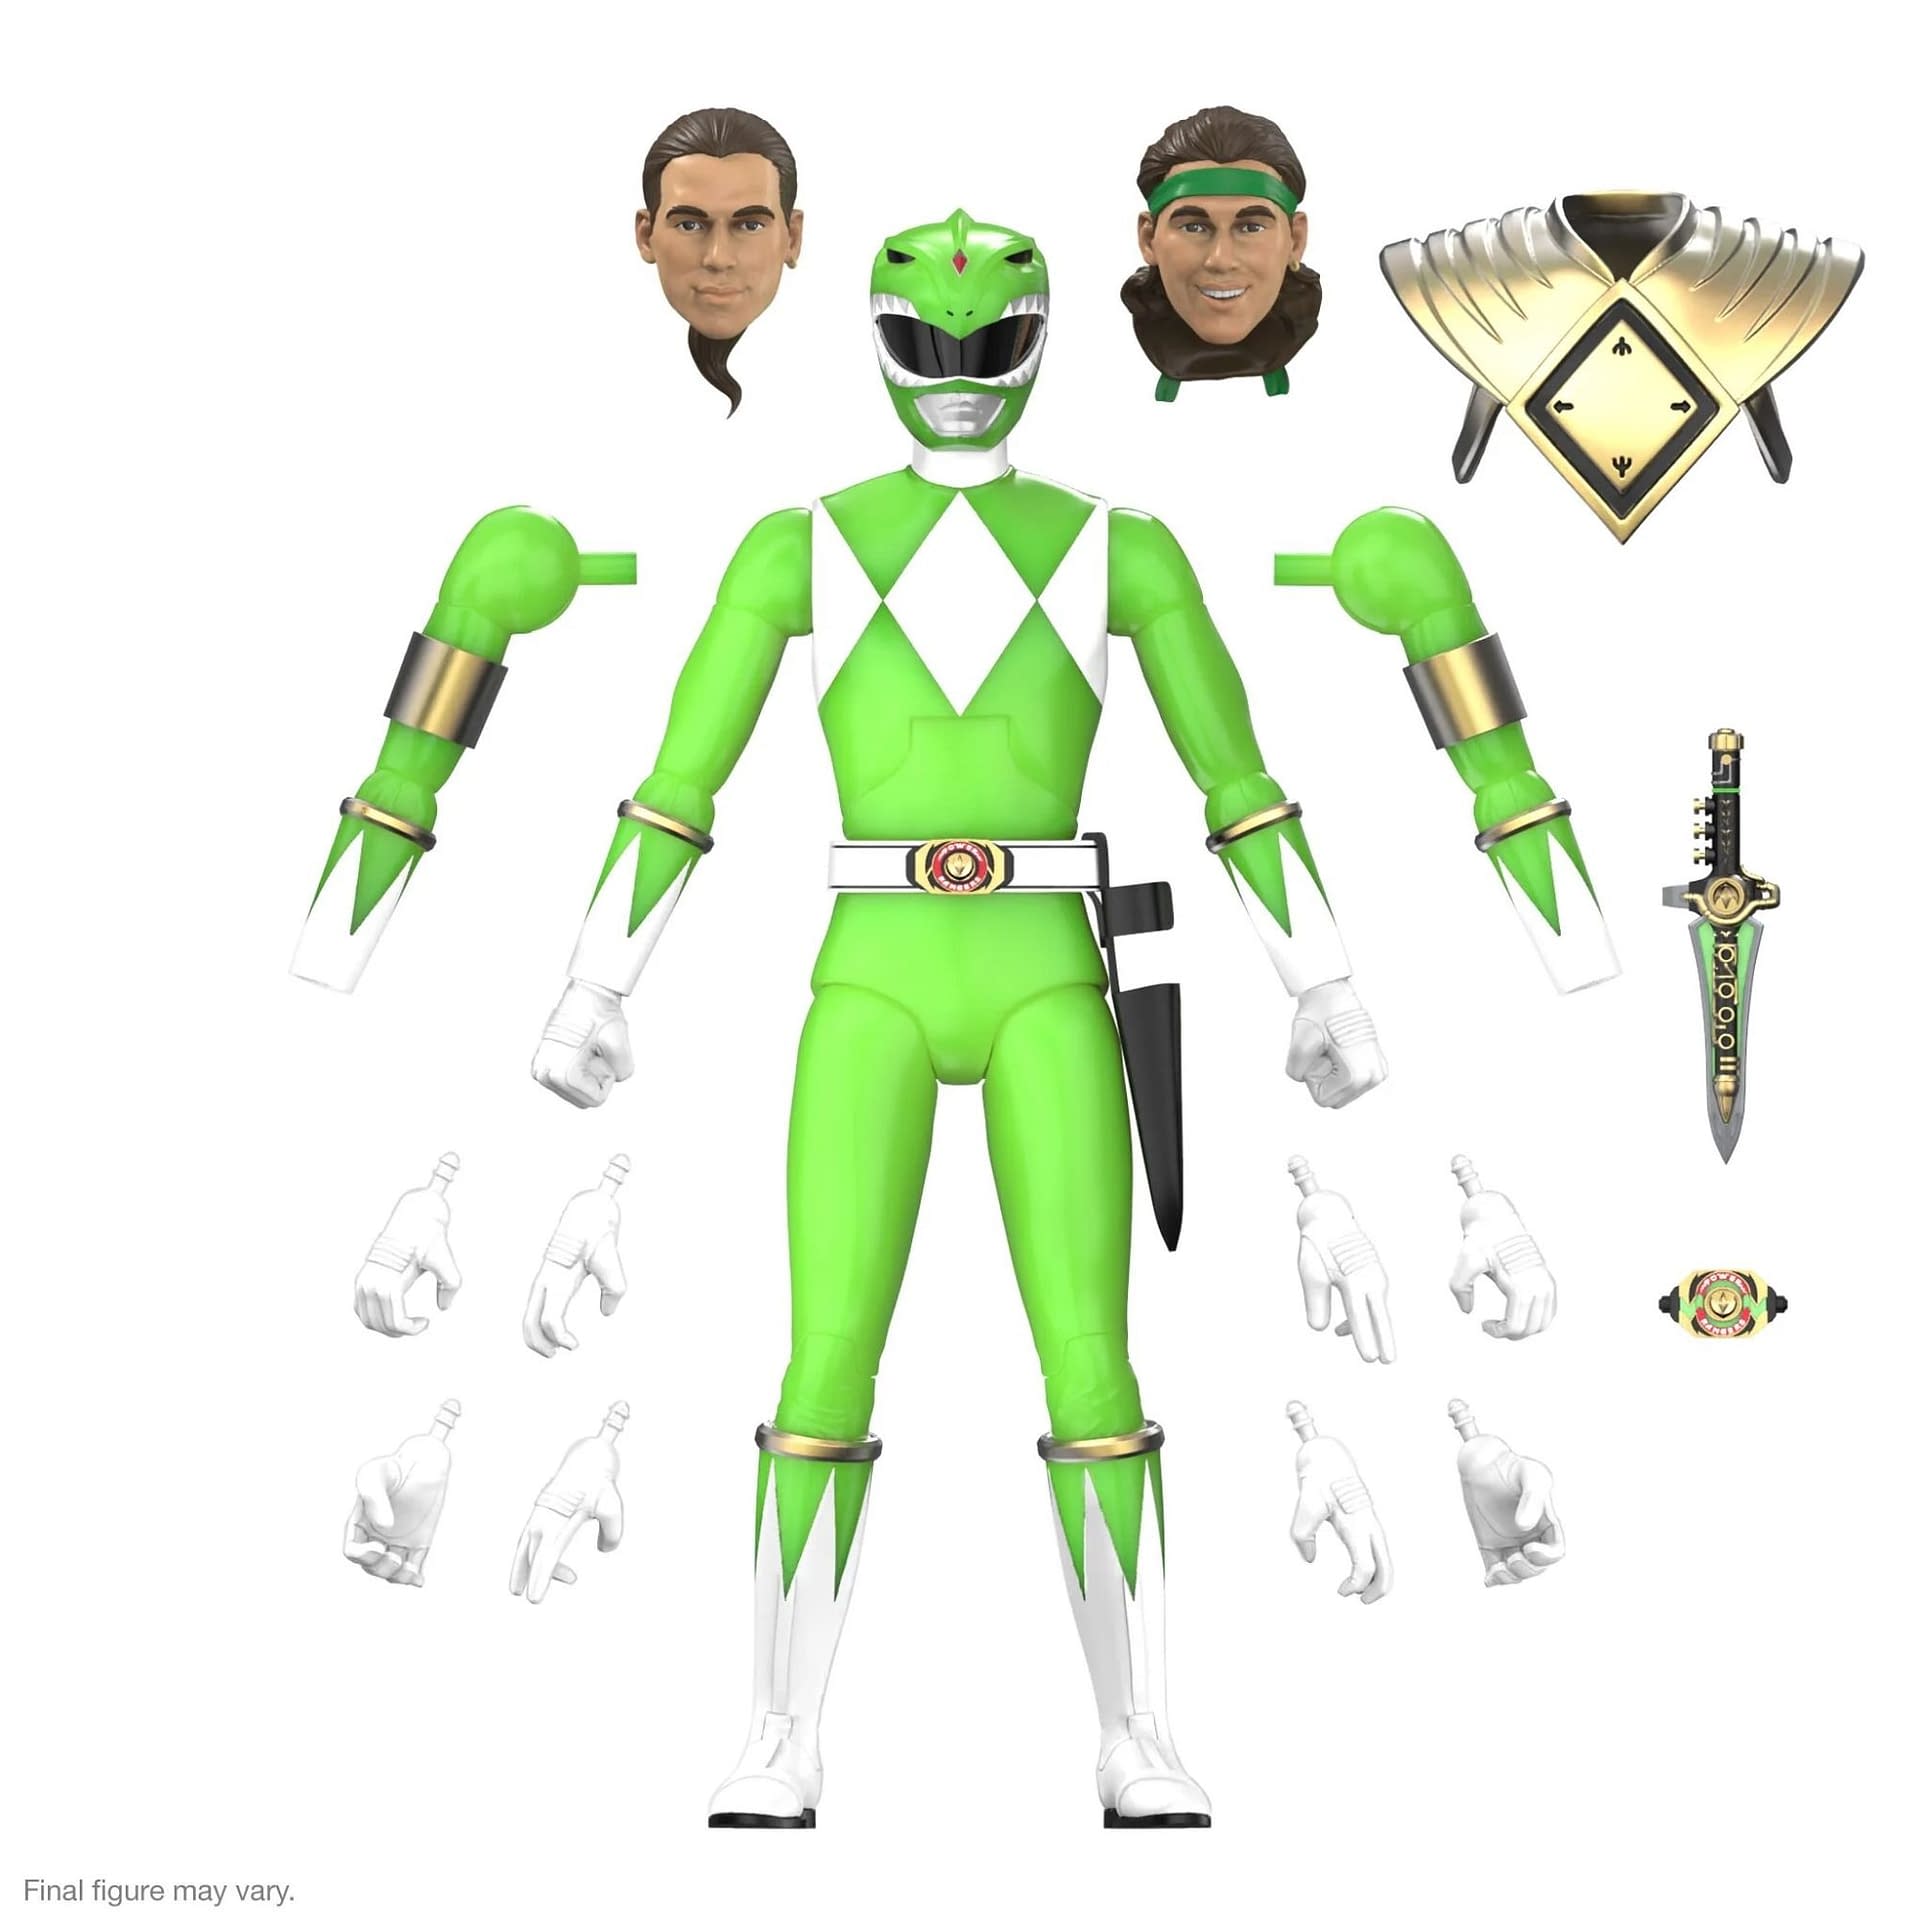 Power Rangers Green Ranger Glows with Super7's New Ultimates Figure